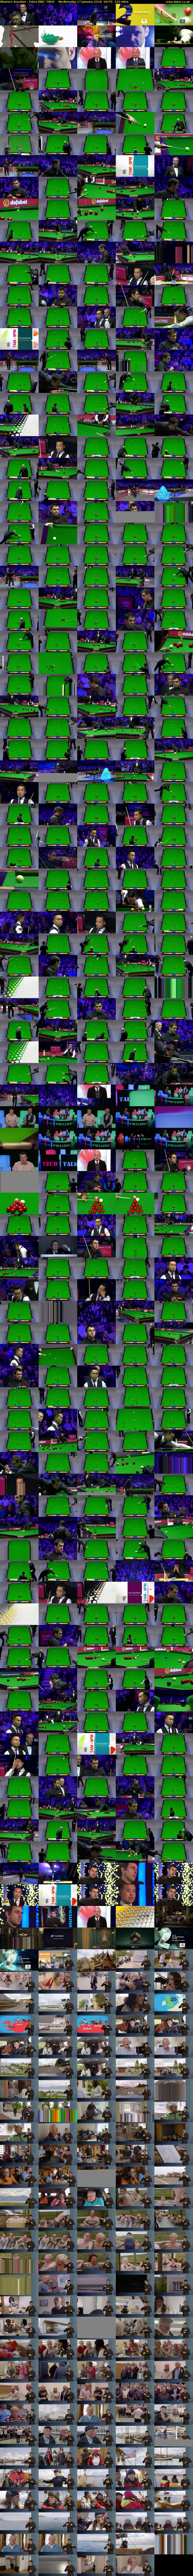 Masters Snooker - Extra (BBC TWO) Wednesday 17 January 2018 00:55 - 02:55